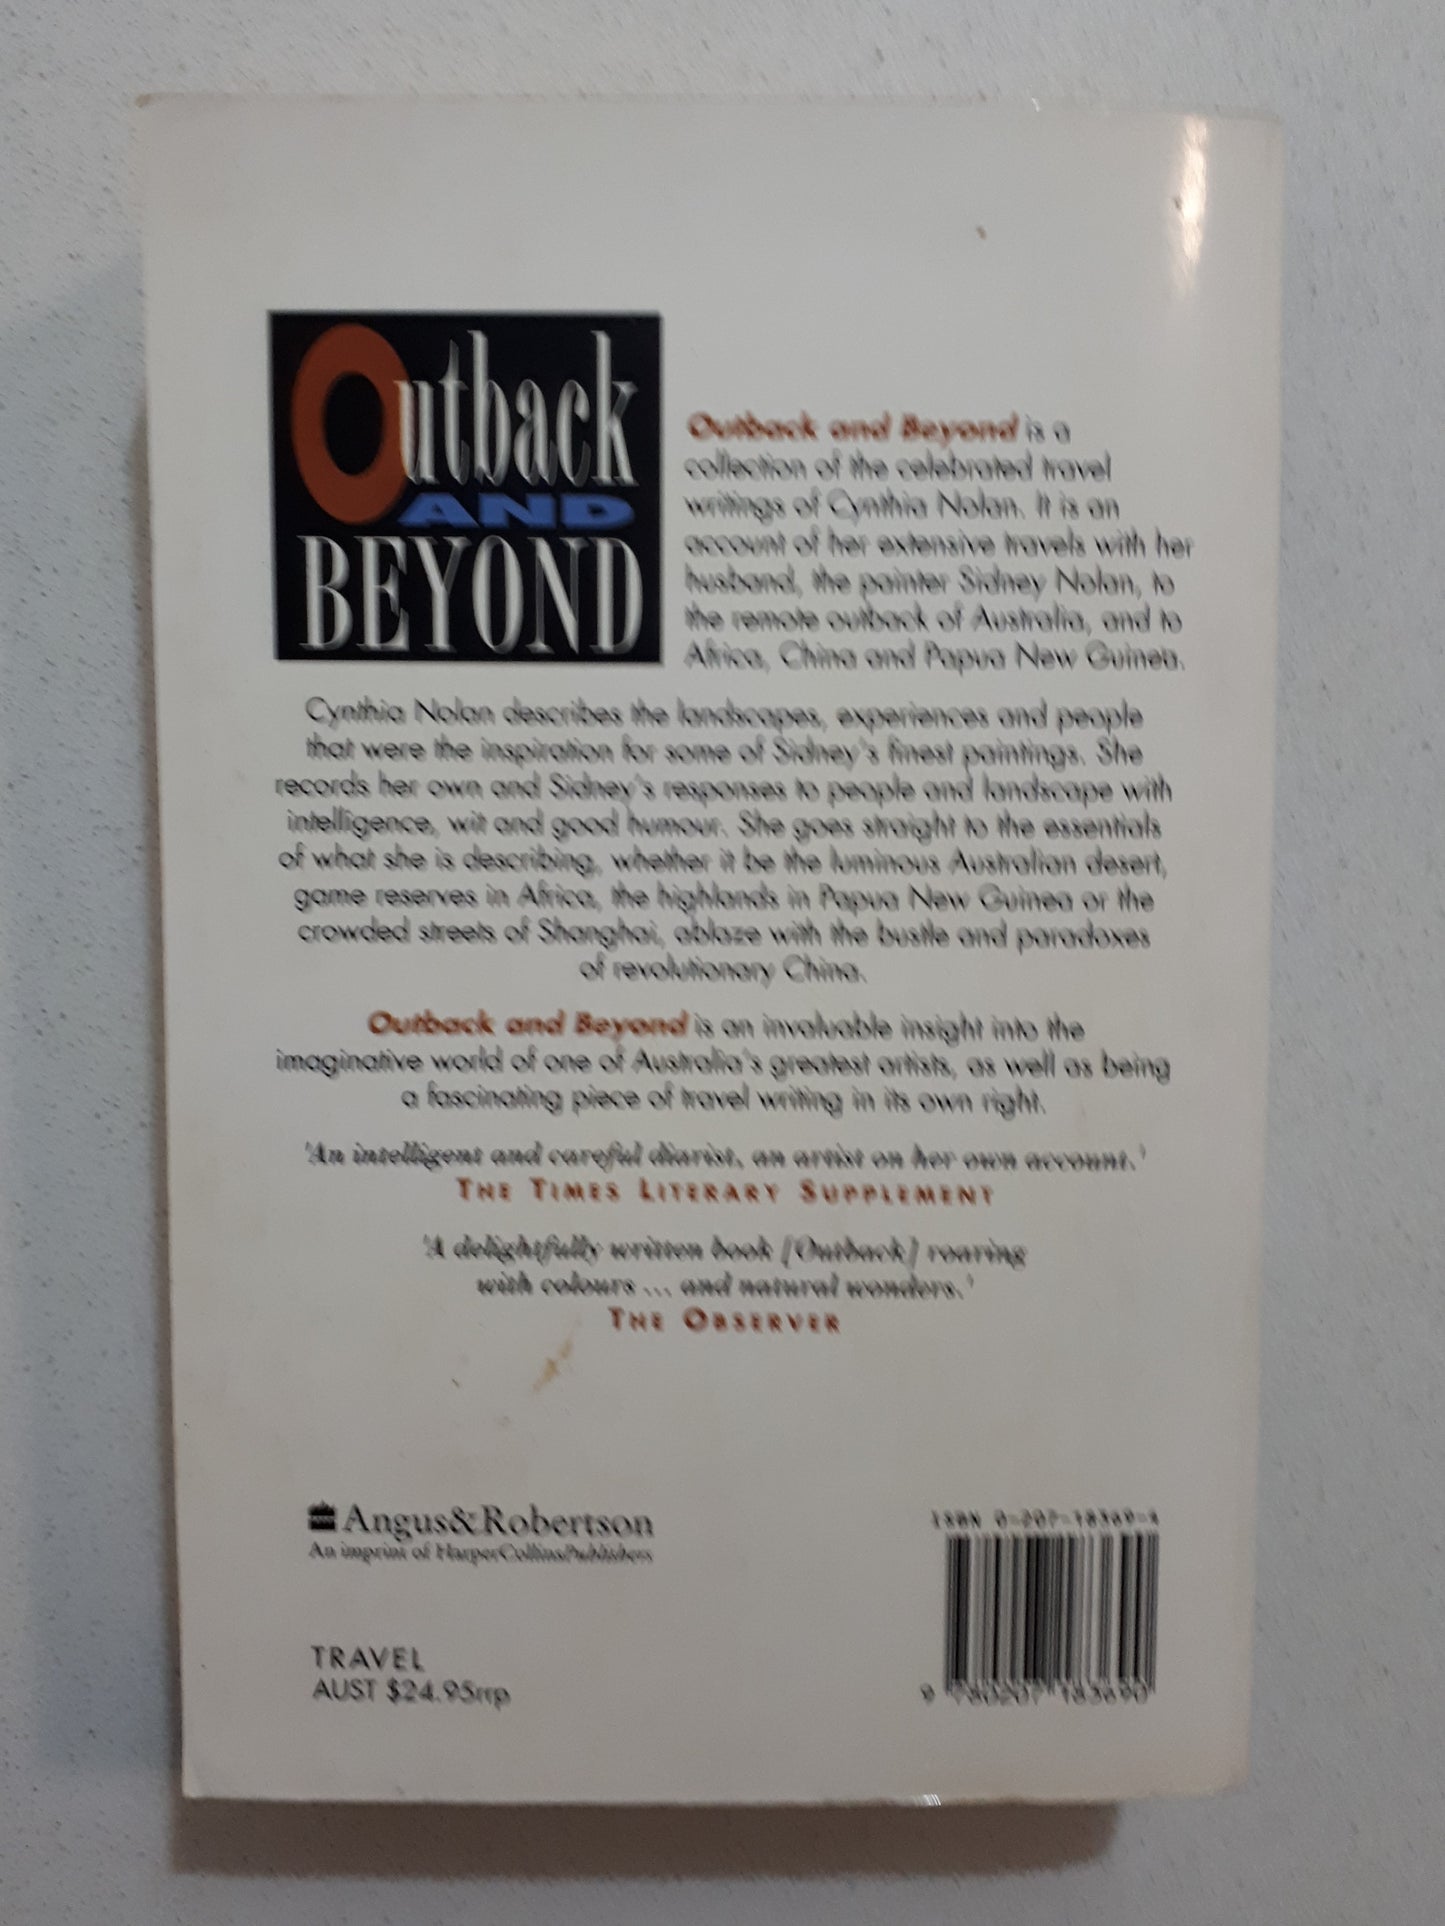 Outback and Beyond by Cynthia Nolan